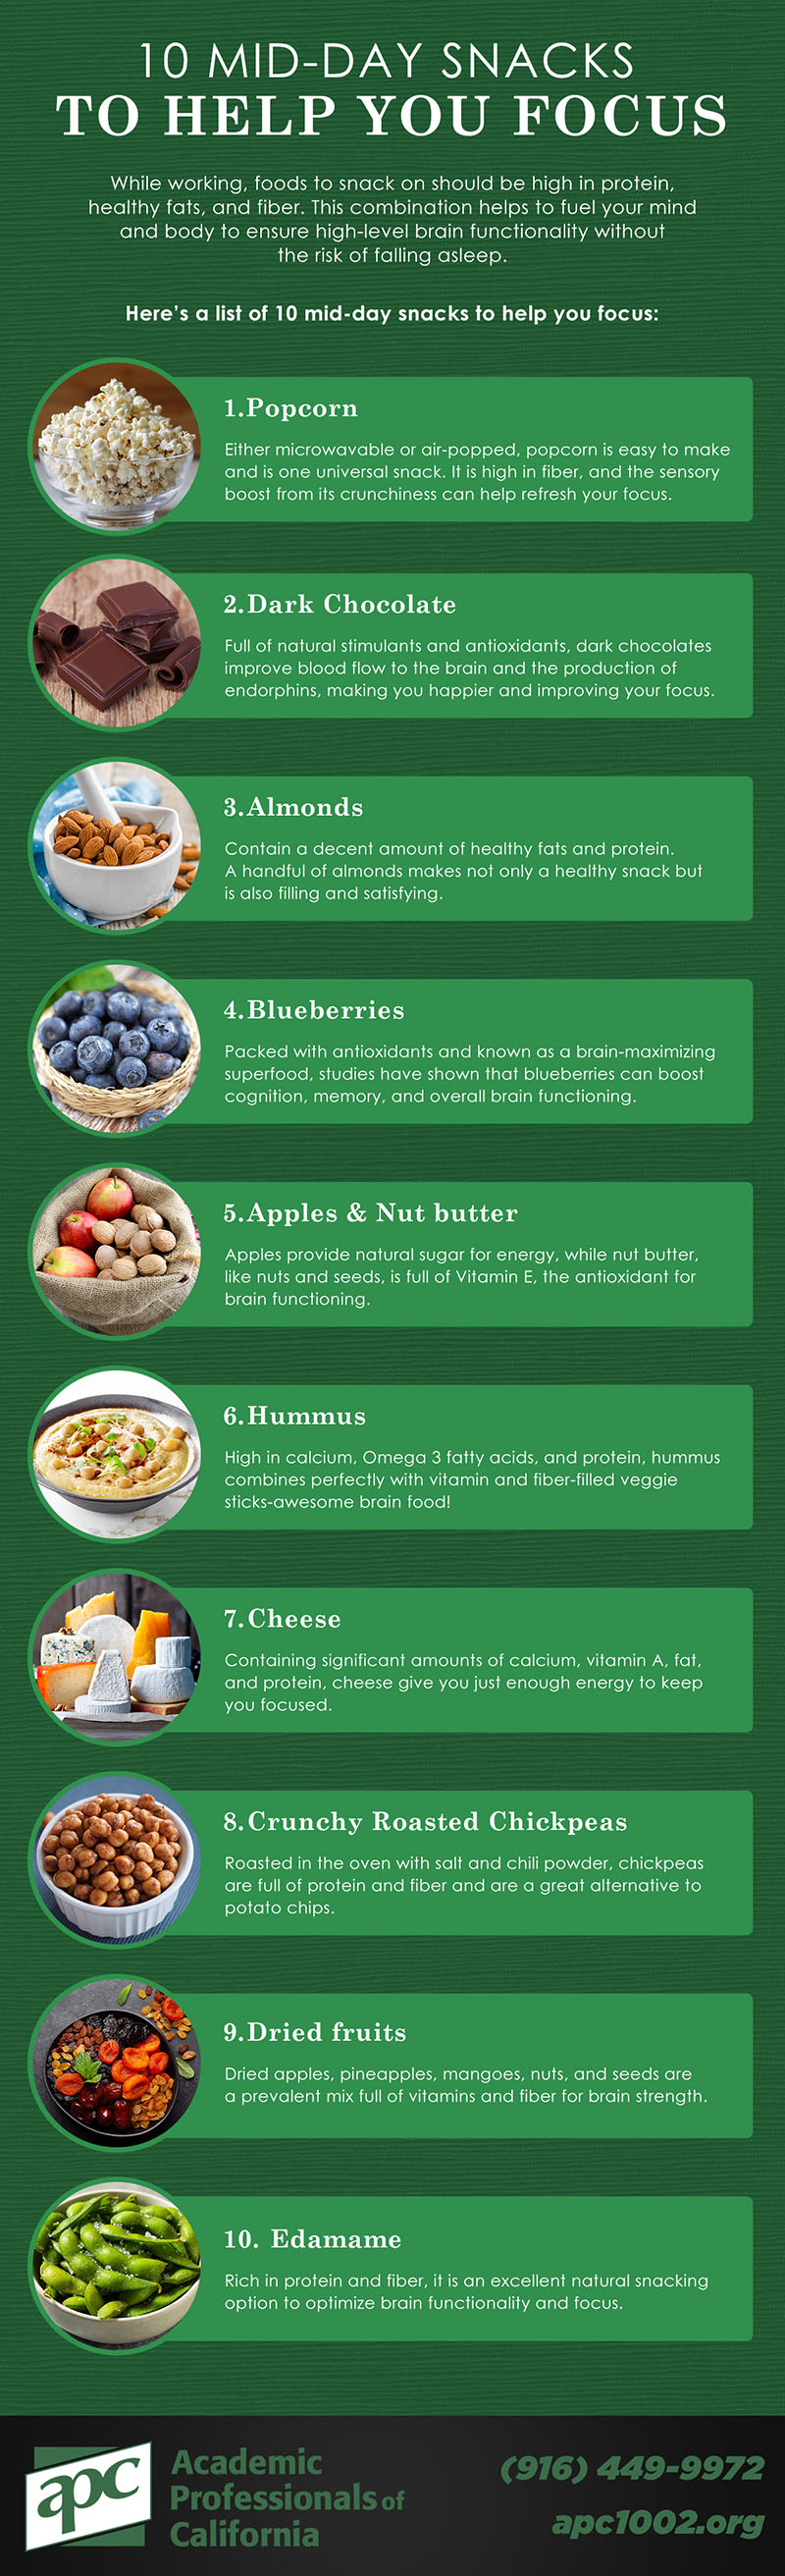 10 Mid-day Snacks to help you focus